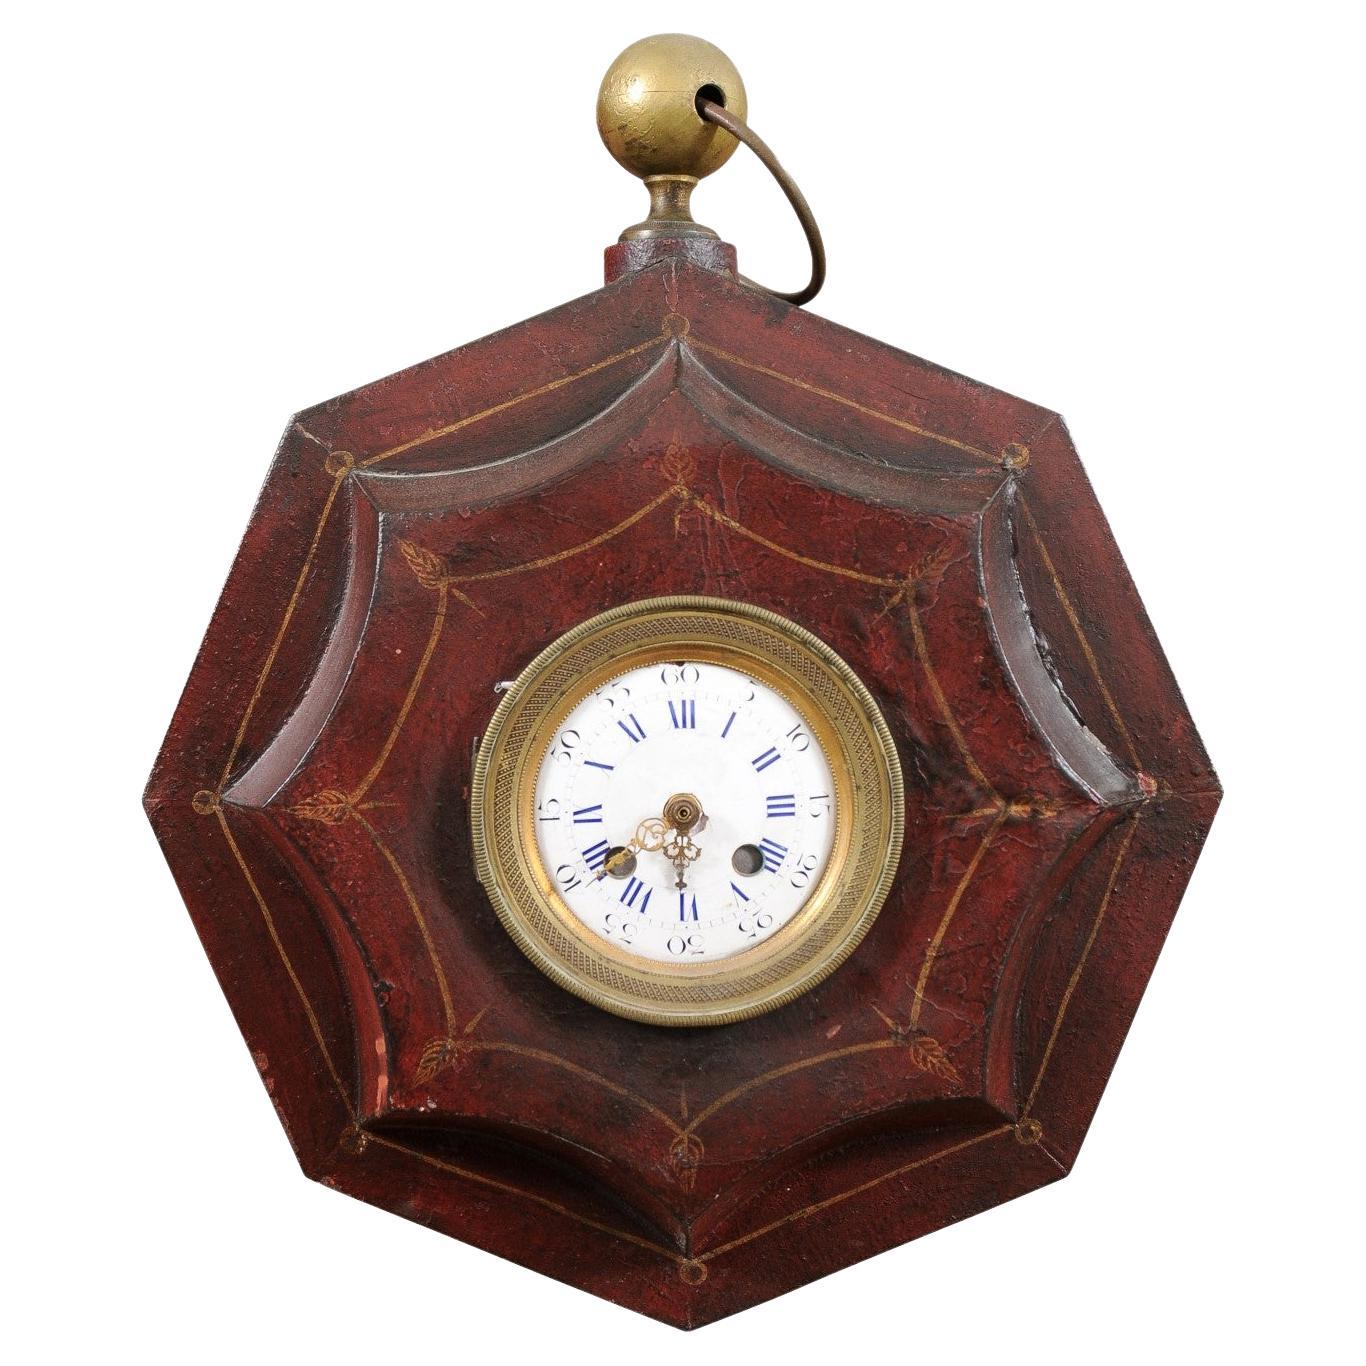  19th Century French Red Painted Tole Wall Clock